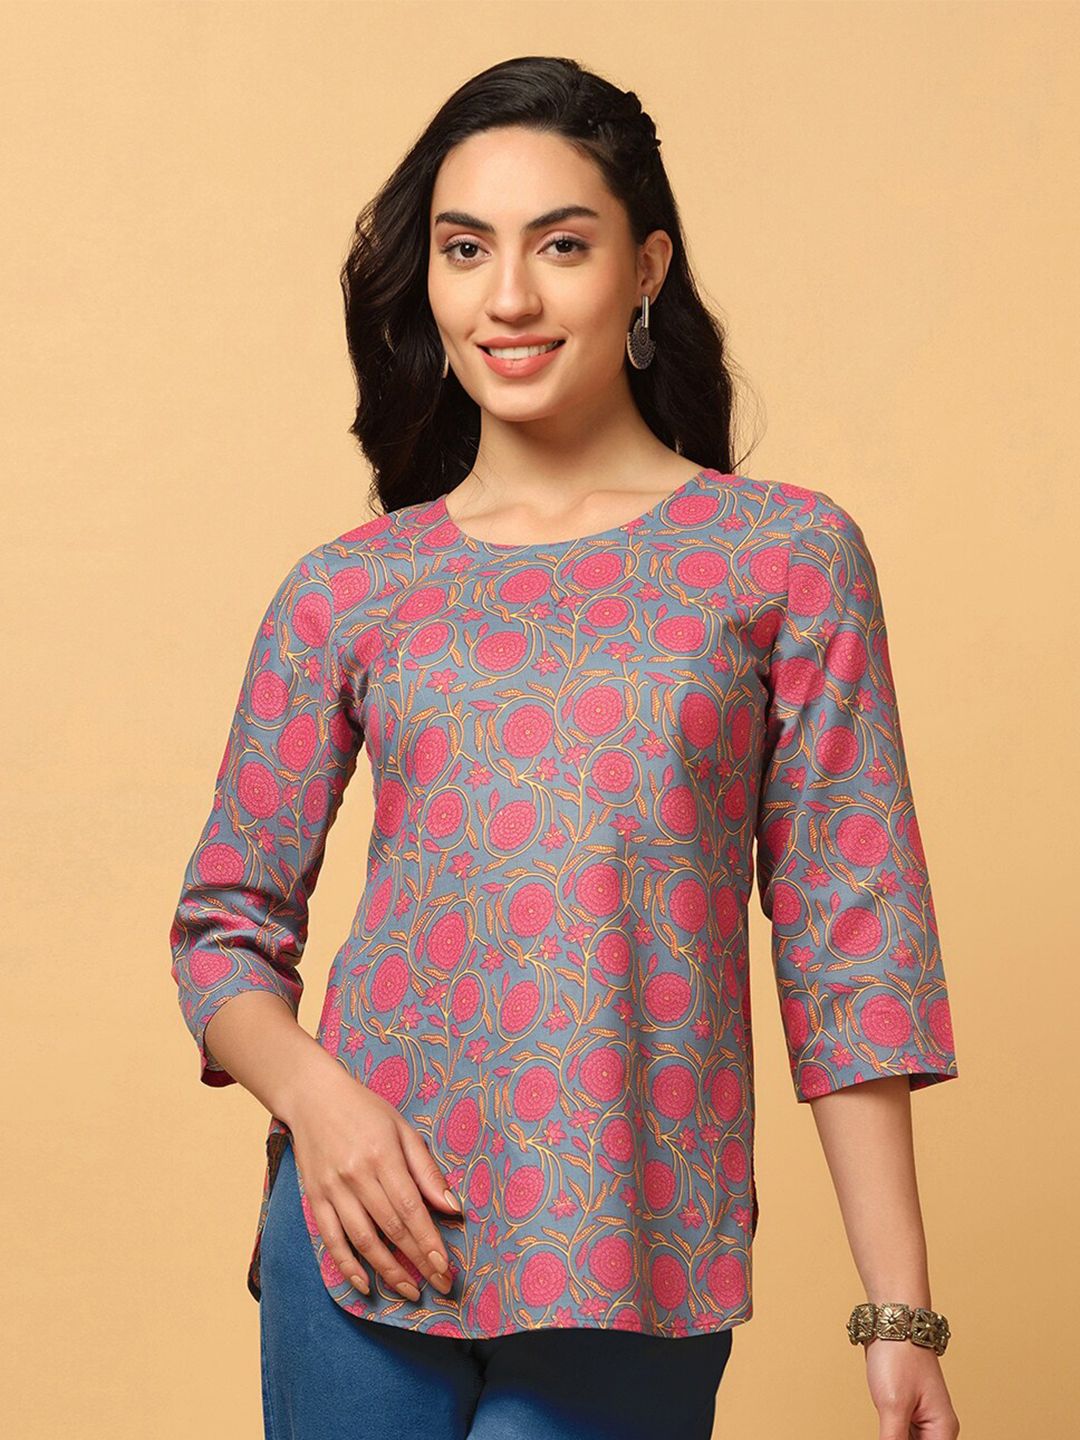 FASHION DREAM Floral Print Top Price in India